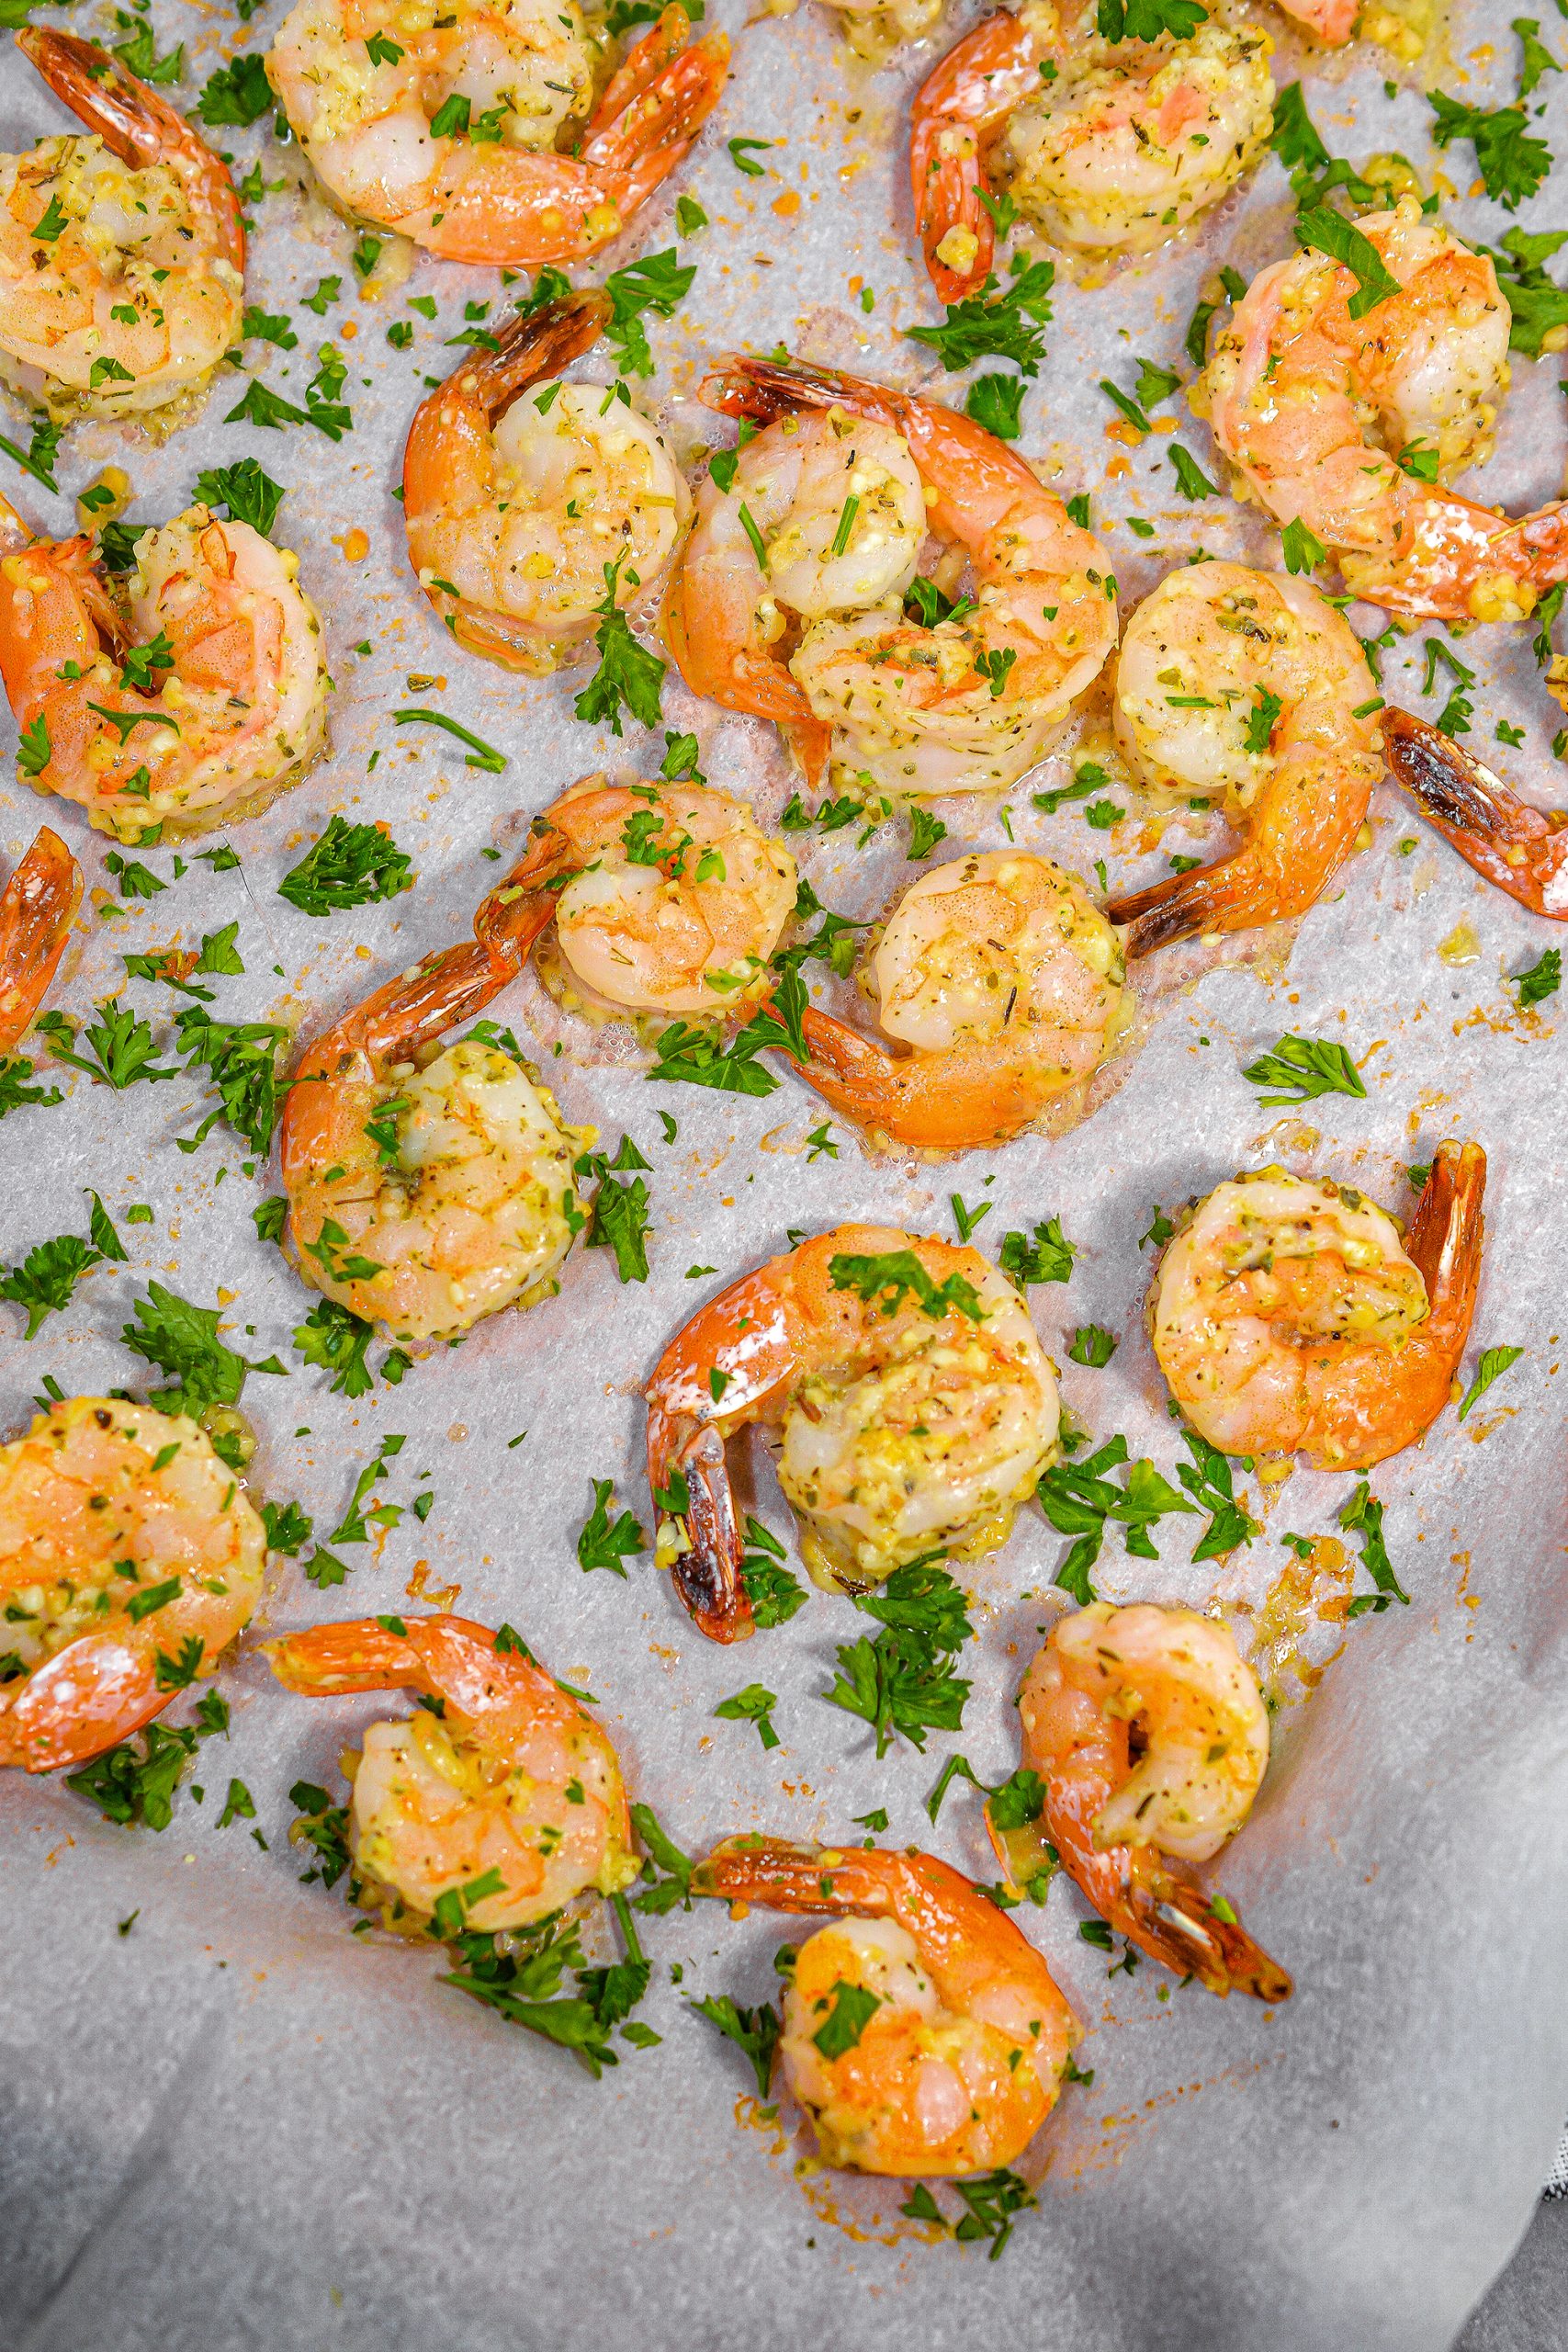 Squeeze fresh lemon juice to taste over the shrimp, and garnish with parsley before serving.